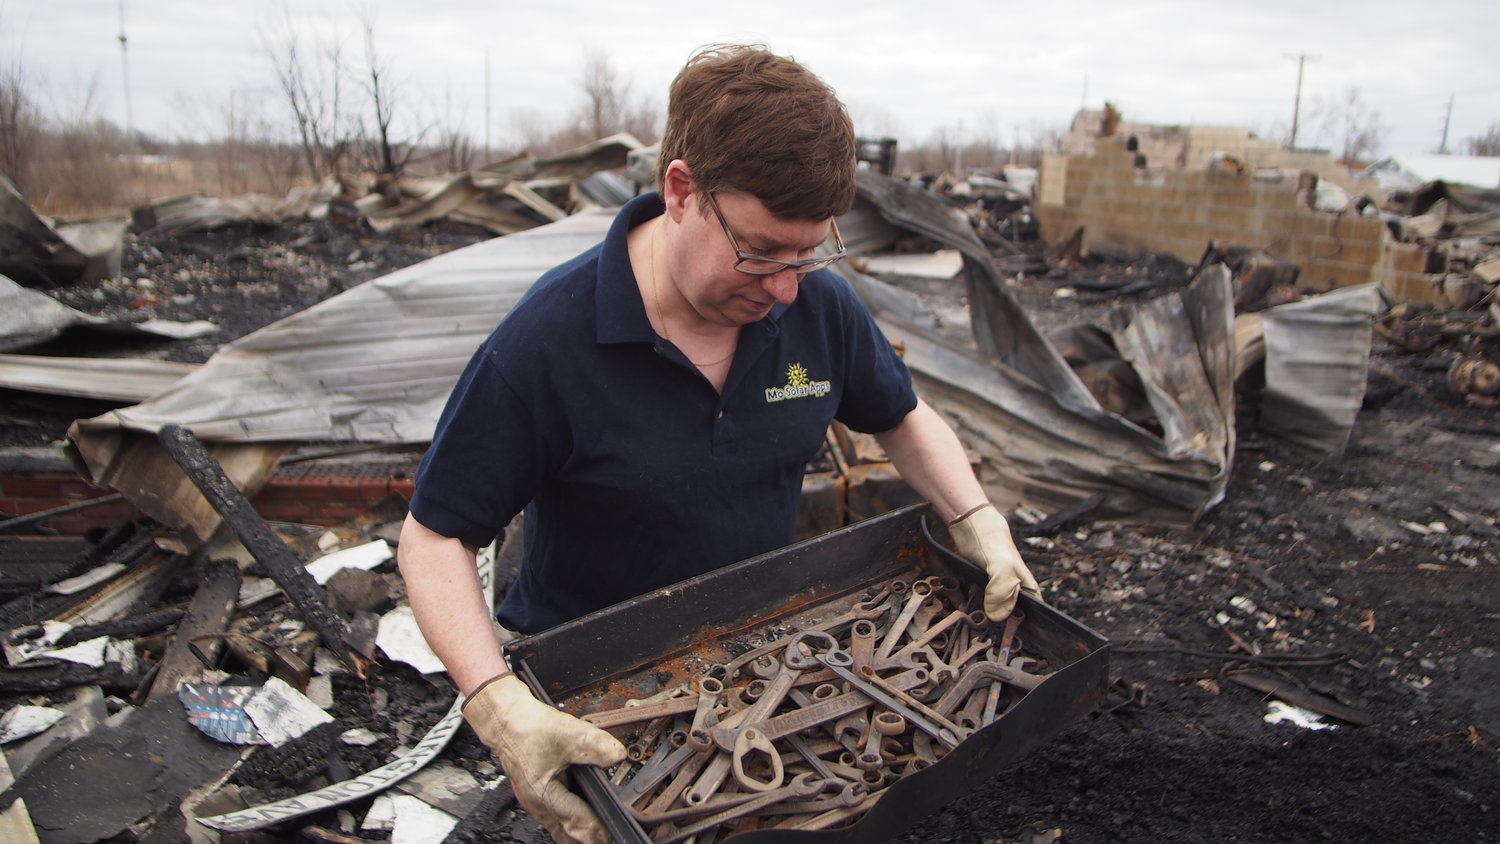 Curt Holman finds a drawer of tools Wednesday, March 10, 2021, from the fire that destroyed Martinez Body Shop, 101 W. Washington Ave., on Tuesday, March 9, 2021. Not much else survived the searing heat.